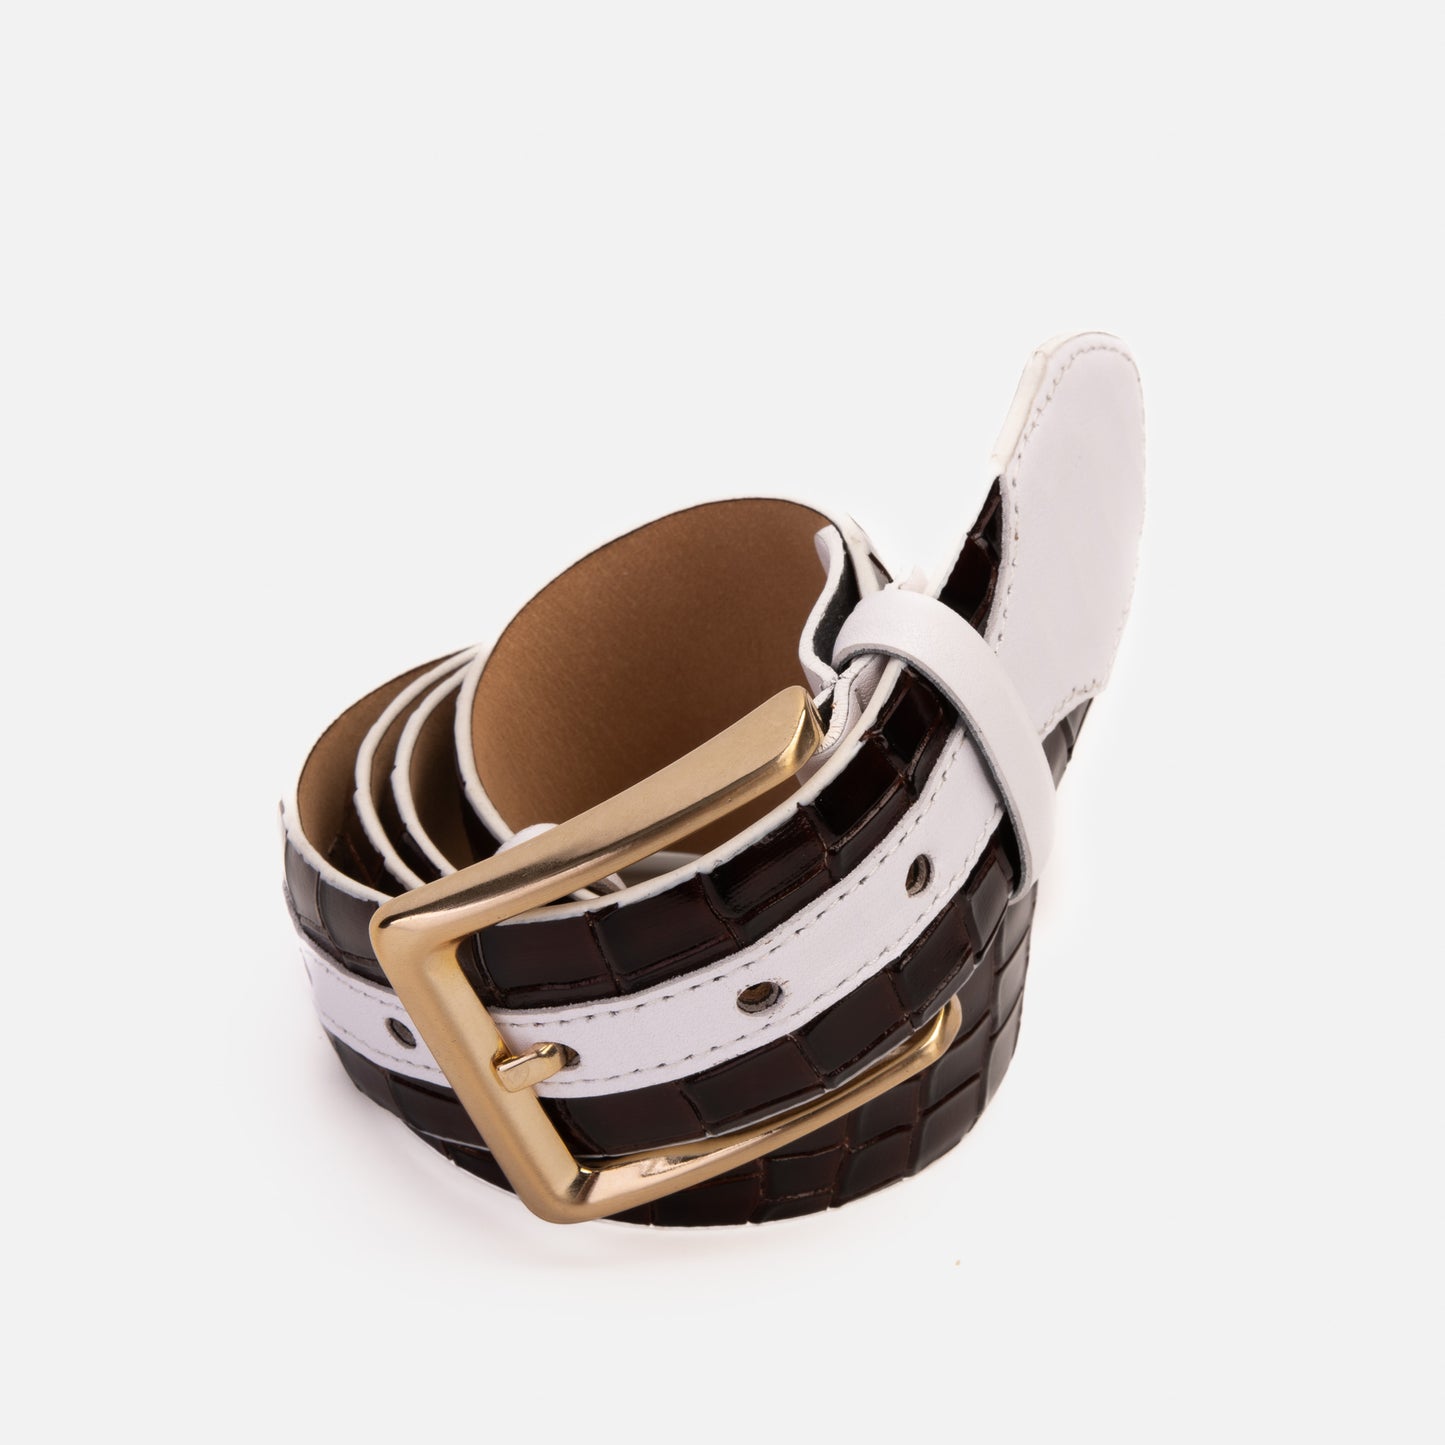 The Bellagio Brown & White Leather Belt